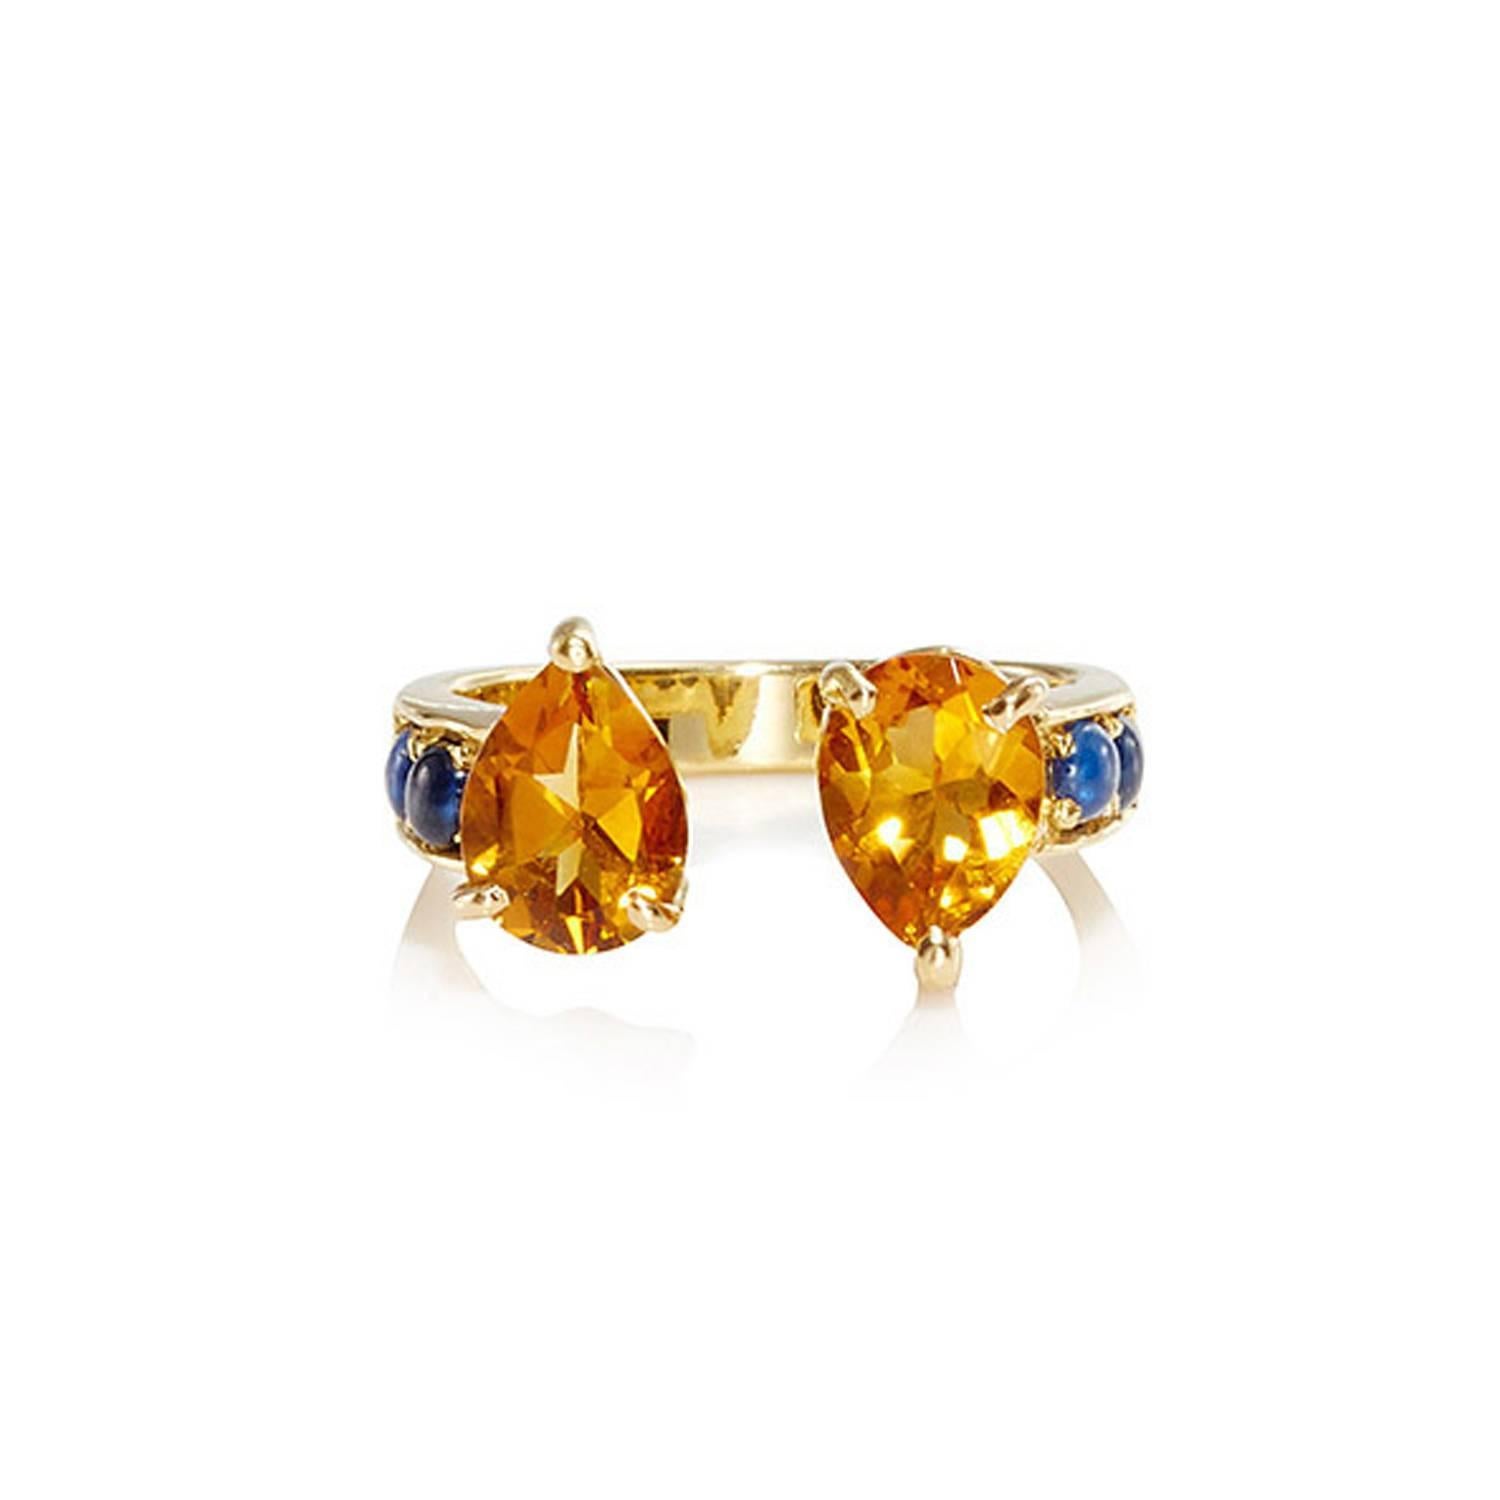 This DUBINI ring from the 'Theodora' collection features citrine drops with sapphire cabochons set in 18K yellow gold. 

…………………………………………………………………………………………………………………………………………………………………….

Inspired by Empress Theodora, wife of Justinian I, she was